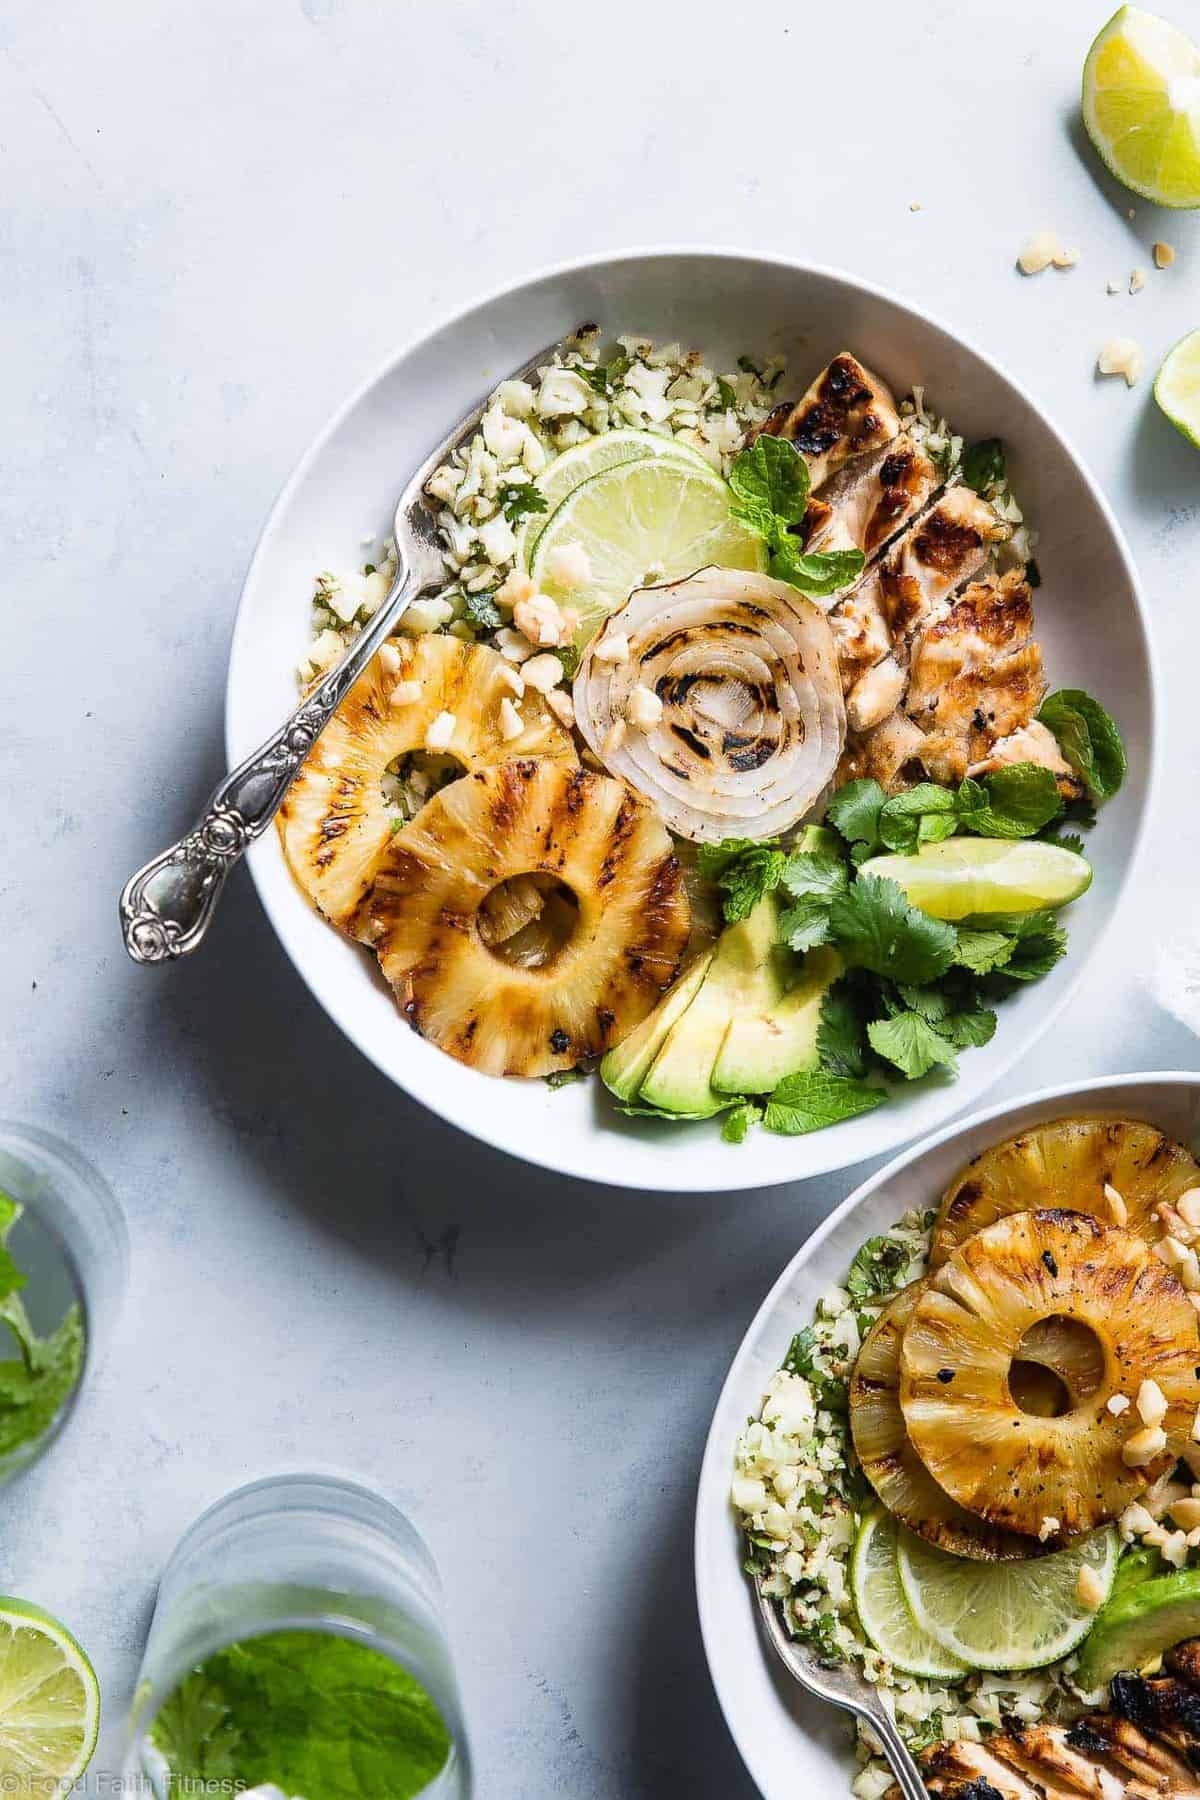  Grilled Tropical Chicken Bowls - These paleo and whole30 compliant Grilled Tropical Chicken bowls are an easy, healthy and gluten free weeknight dinner loaded with sweet and tangy island flavors! Sure to be a crowd pleaser! | #Foodfaithfitness | #Paleo #Whole30 #Glutenfree #Healthy #Chickendinner